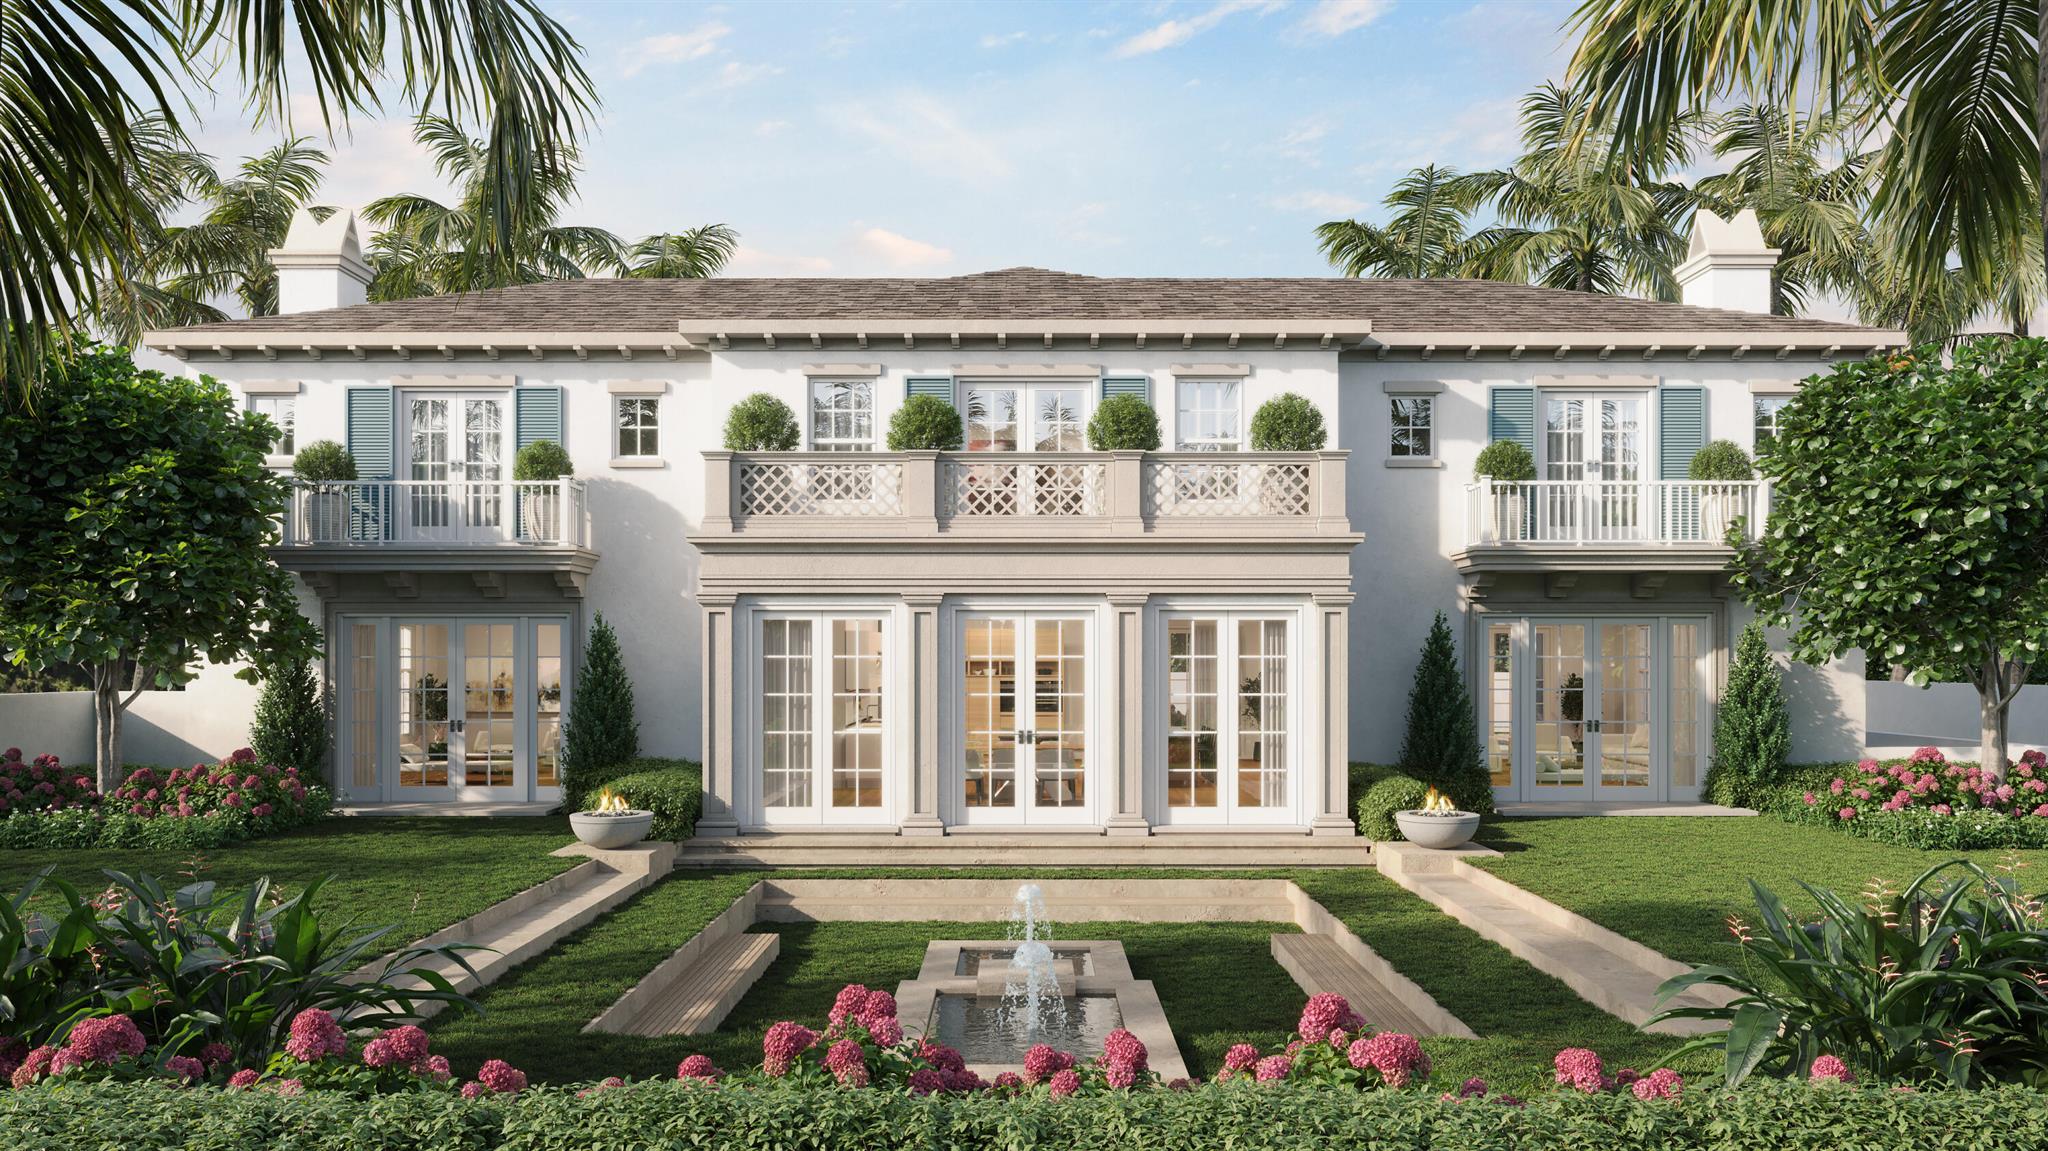 Welcome to 1090 South Ocean Boulevard, a premier new construction property on Palm Beach Island. This exceptional home features superior architectural design and attention to detail with over 13,000 square feet of total living space, including 6 bedrooms, 8.5 bathrooms, a gym, sauna, steam, spa room, walk-in wine cellar, jacuzzi, and lap pool. Sitting on just under half an acre, the property offers true resort-style living including impressive health and wellness amenities within the home, private deeded beach access just steps from the front door, and a deeded membership to the exclusive Mar-a-Lago Club nearby. Anticipated completion is Fall 2025, and this rare opportunity can still be customized in advance of completion. Offered exclusively at $45,000,000, as a finished residence.